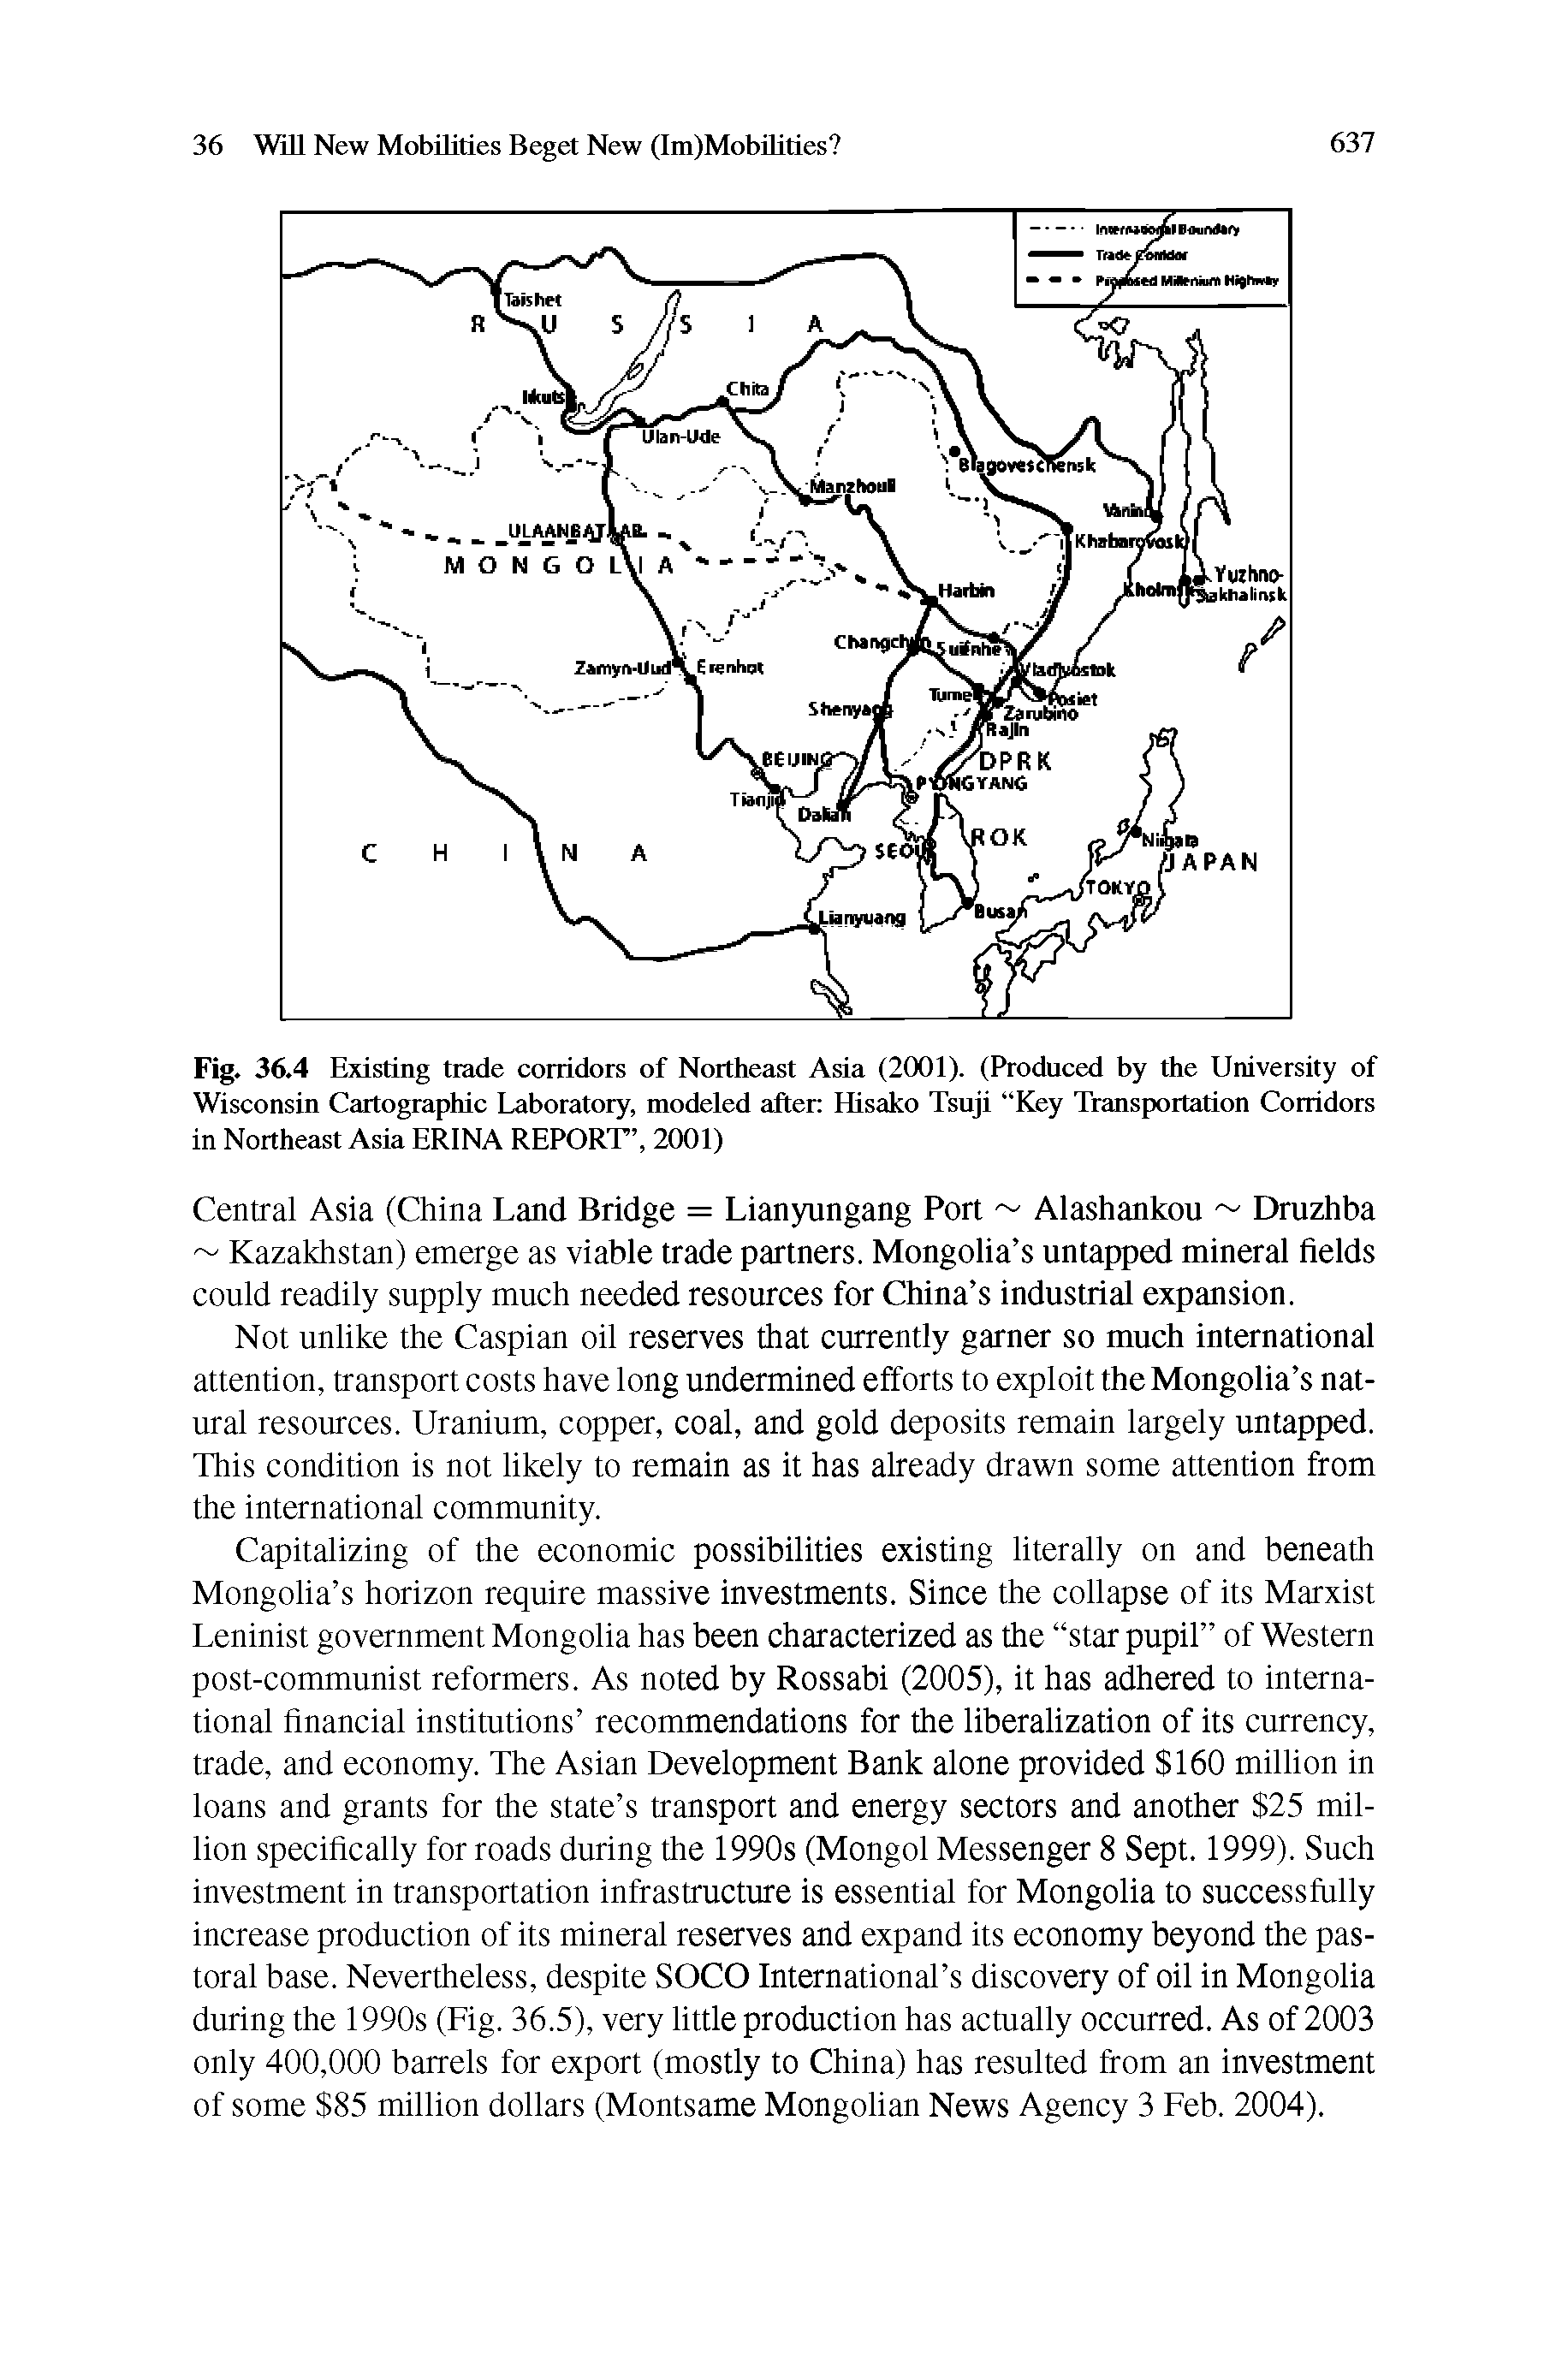 Fig. 36.4 Existing trade corridors of Northeast Asia (2001). (Produced by the University of Wisconsin Cartographic Laboratory, modeled after Hisako Tsuji Key Transportation Corridors in Northeast Asia ERINA REPORT , 2(X)1)...